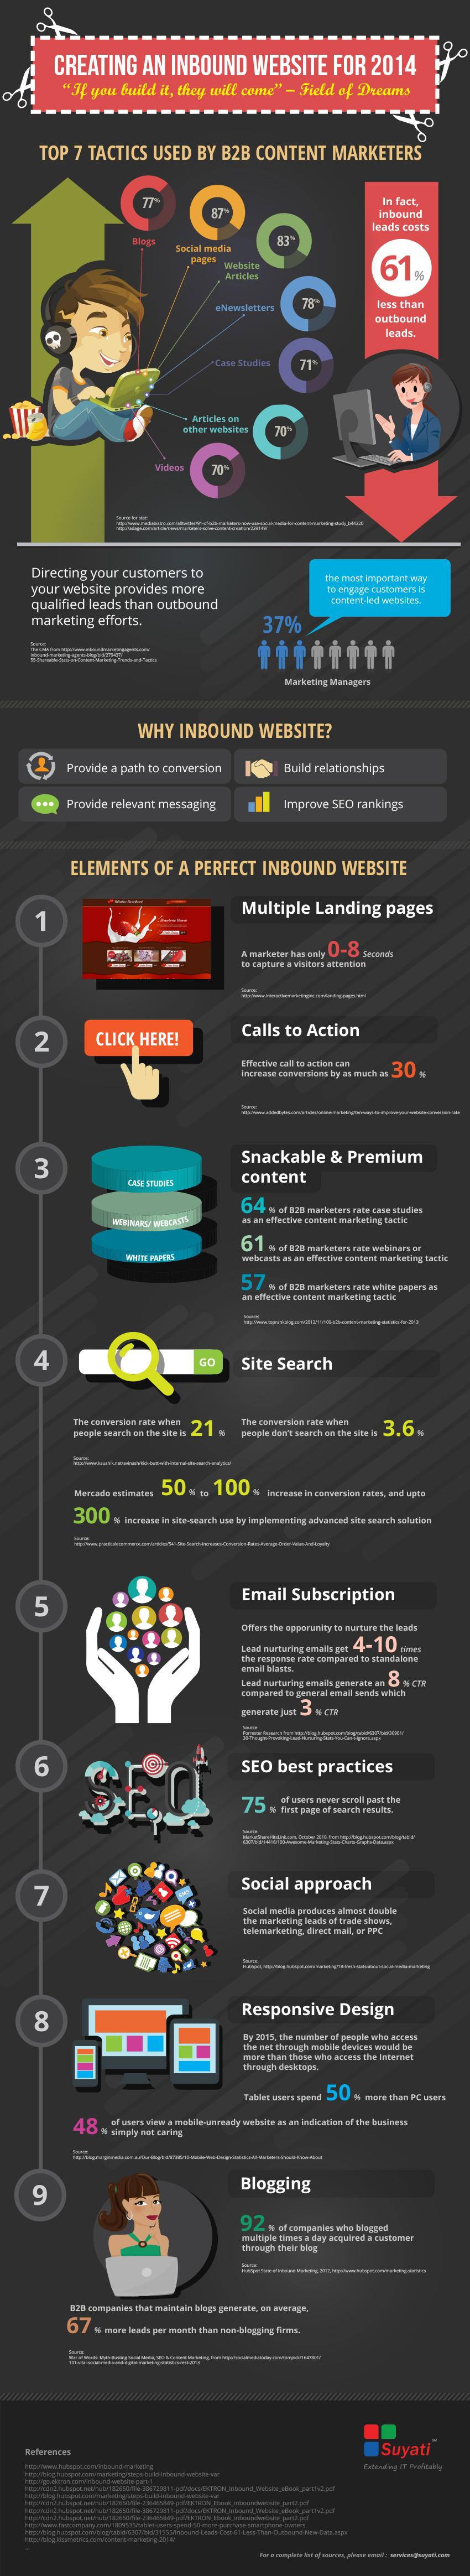 Creating a Inbound Website Strategy for 2014 [INFOGRAPHIC]